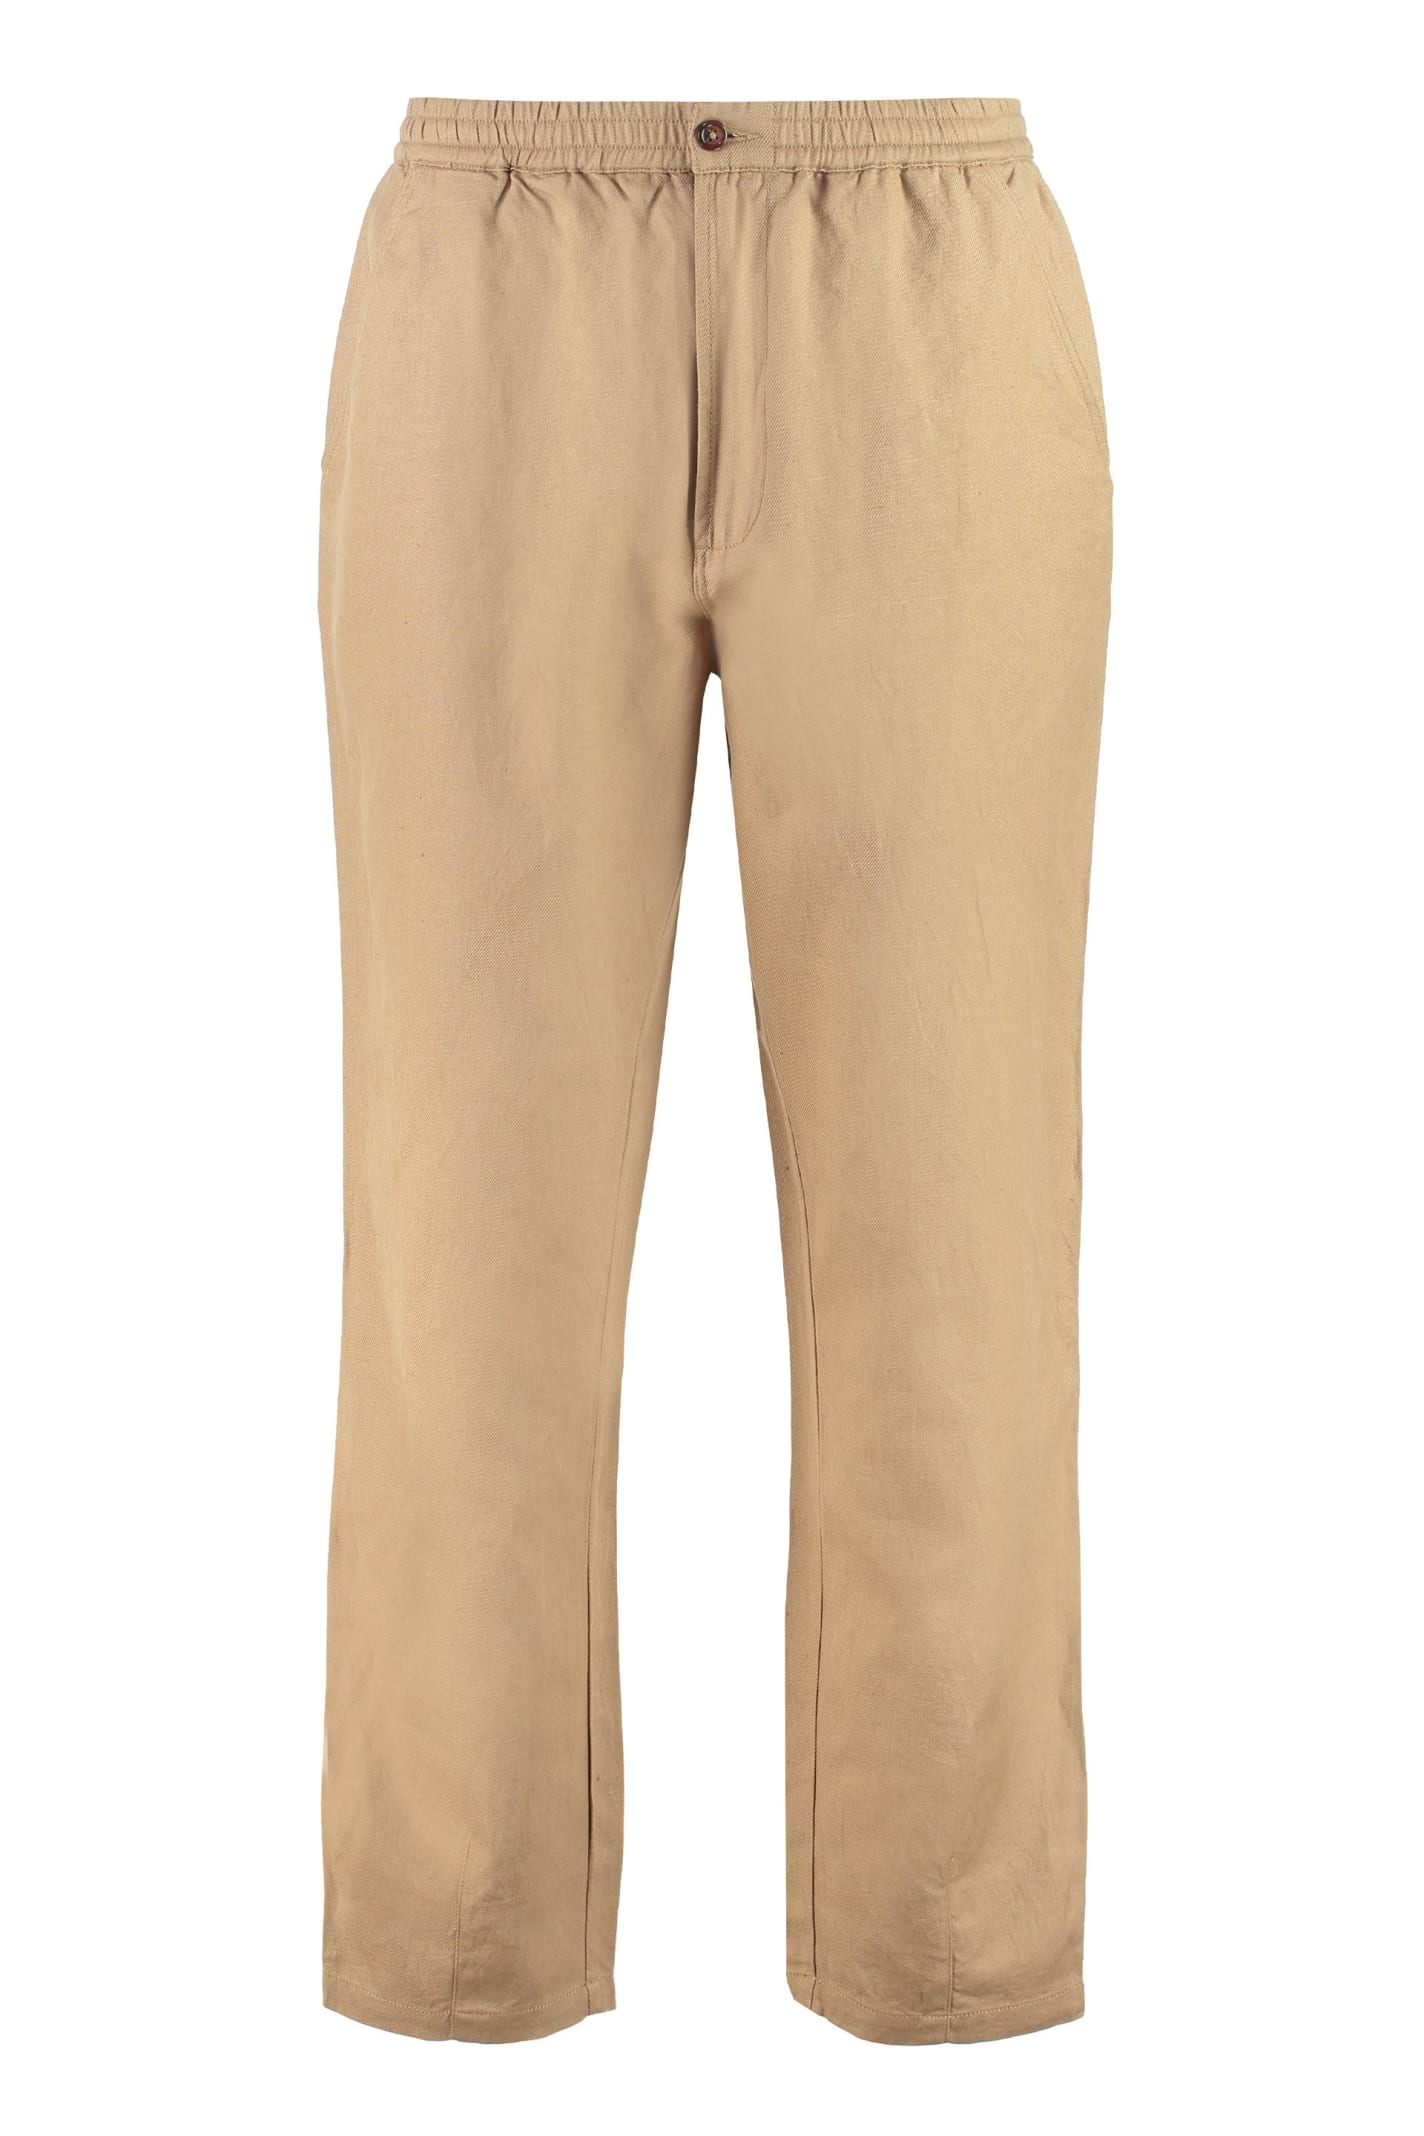 Universal Works Linen And Cotton Trousers